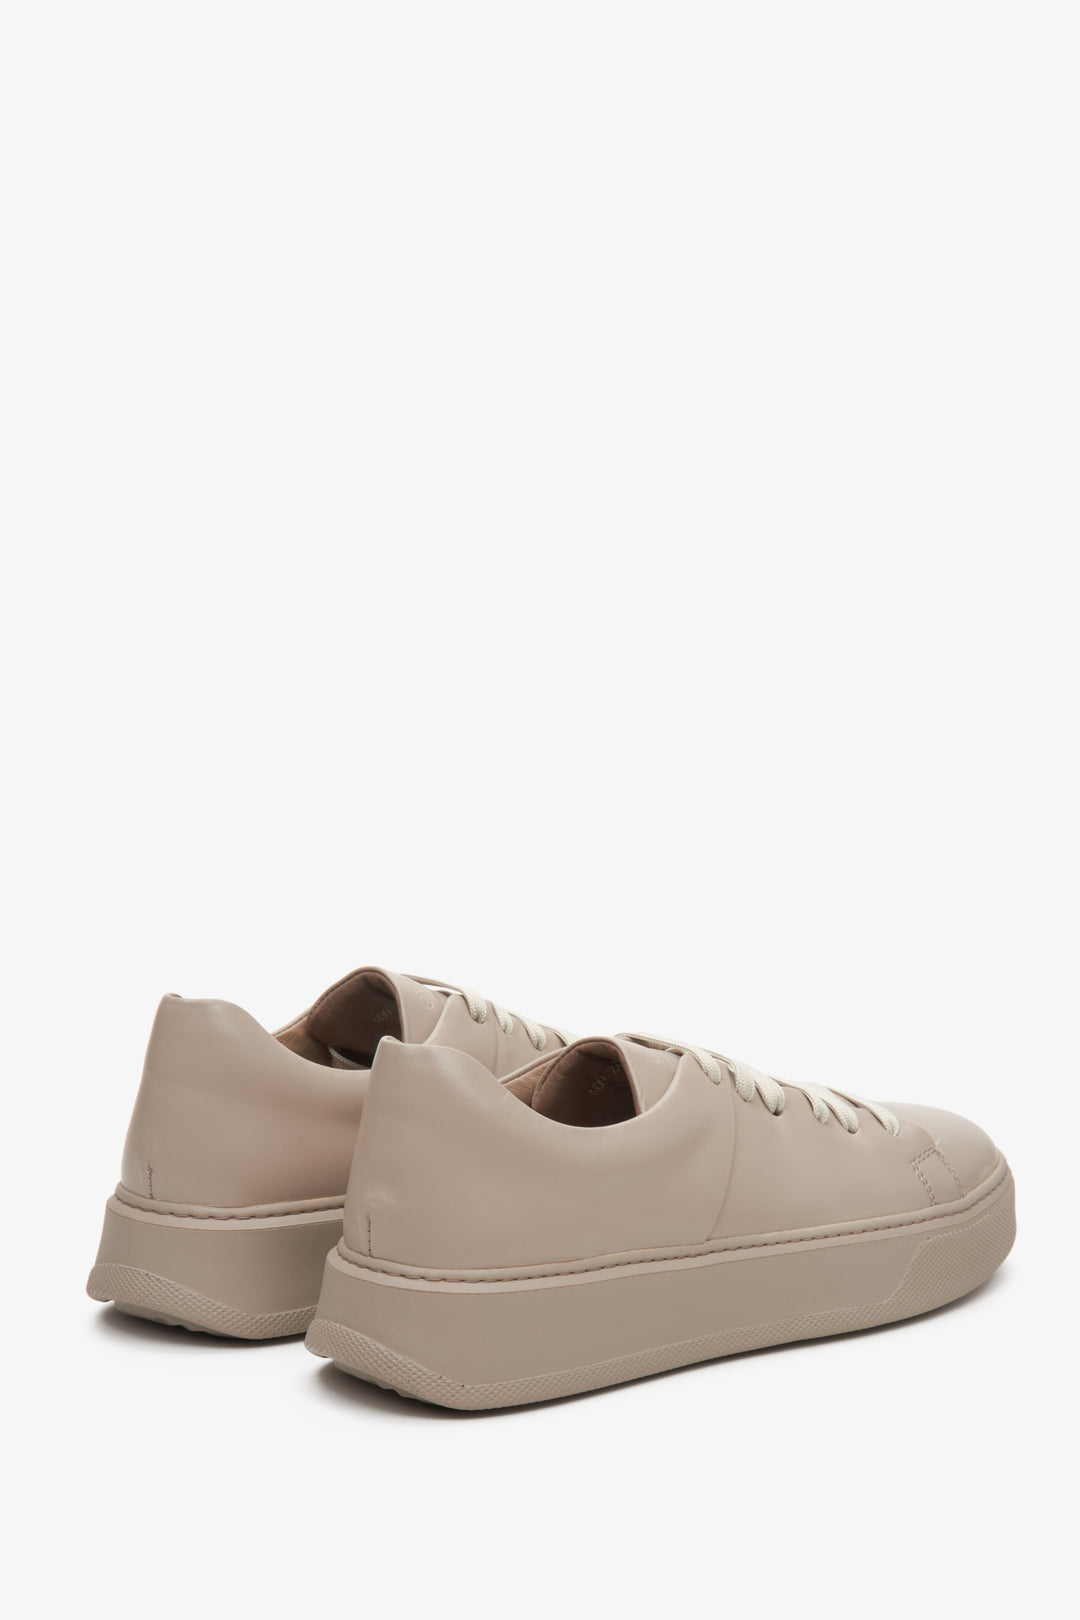 Women's beige leather sneakers by Estro - presentation of the heel and side seam of the shoe.